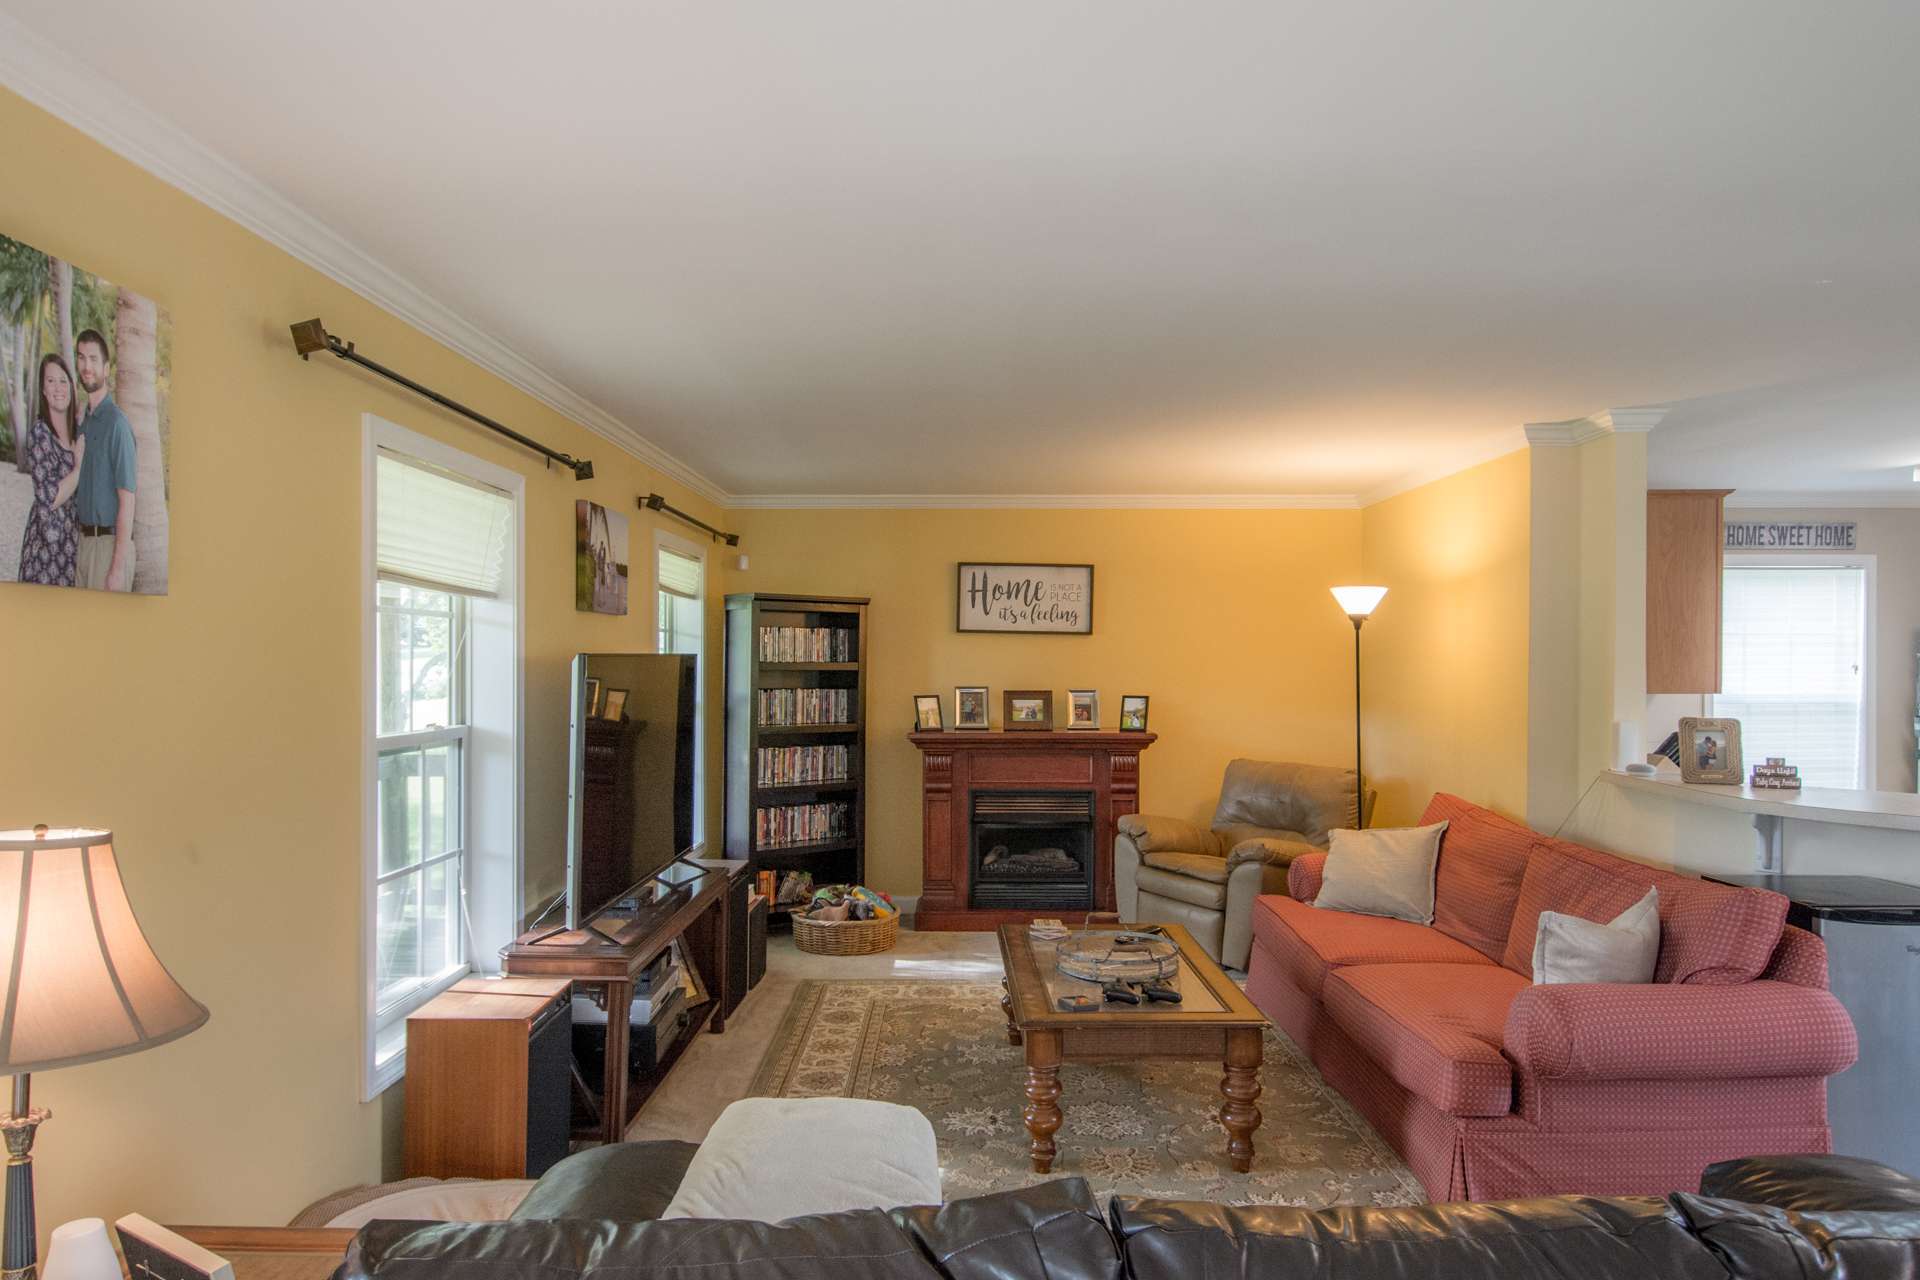 The main level features a bright and cheery living area with high ceiling, crown molding and open to the kitchen and dining area.